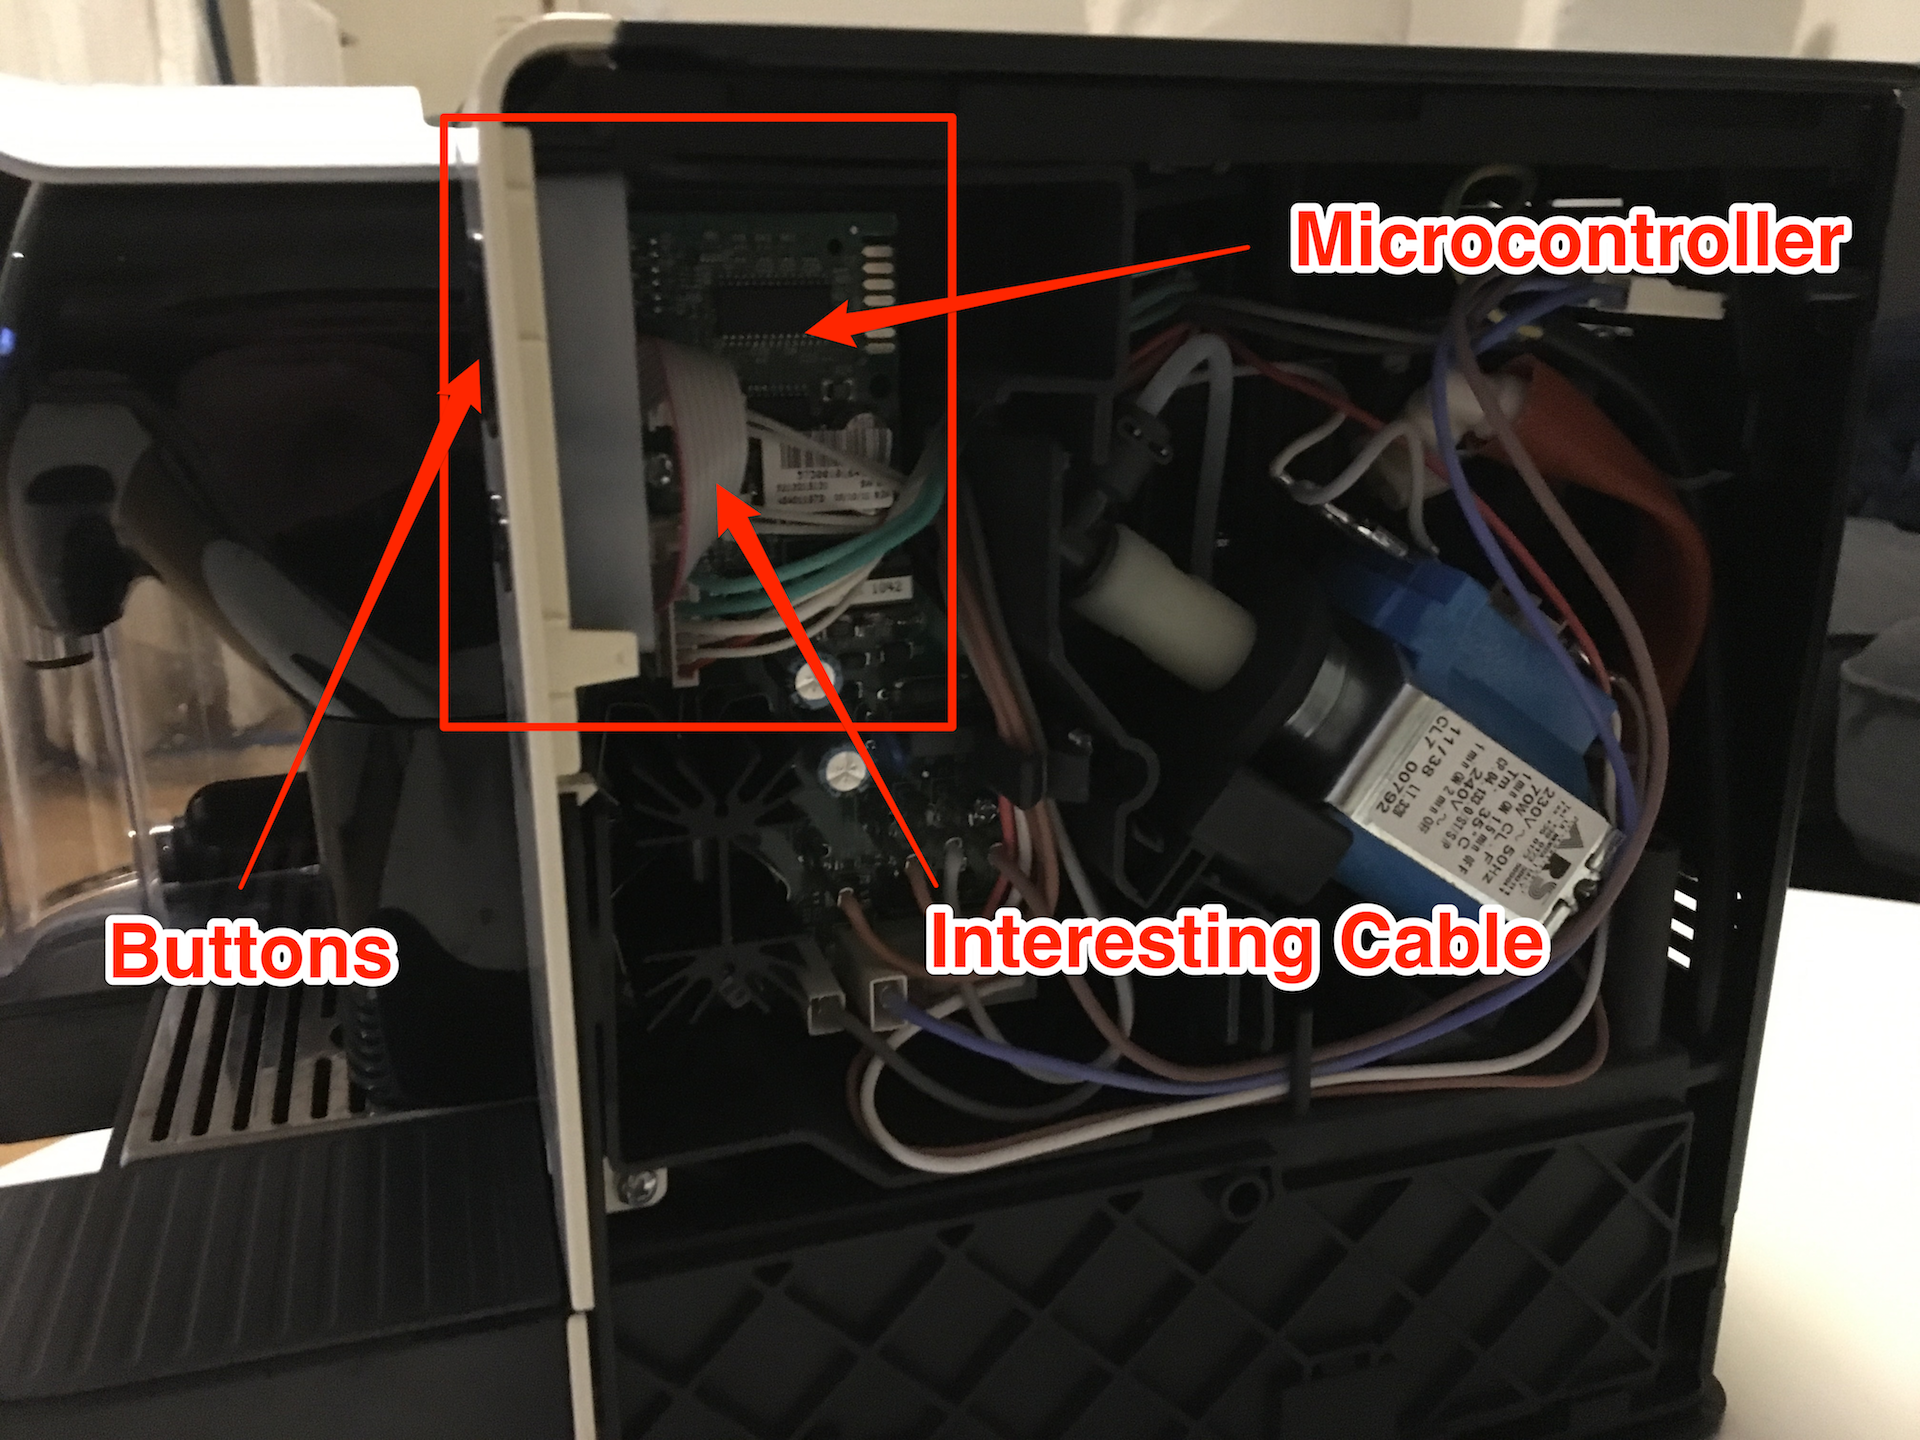 Annotated Picture of opened Latissima highlighting Buttons and Microcontroller